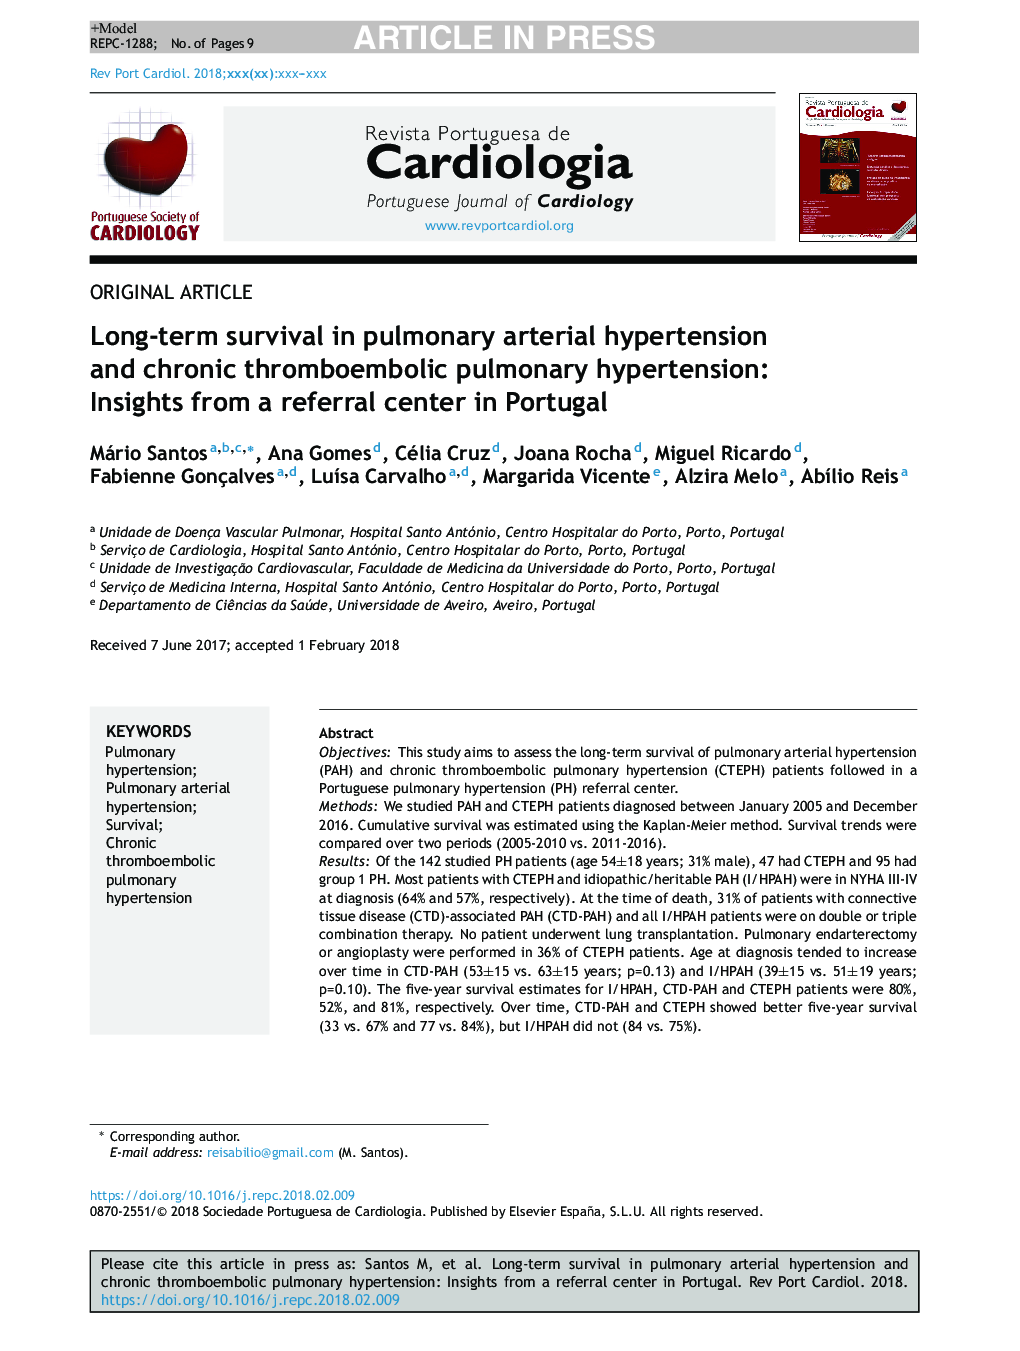 Long-term survival in pulmonary arterial hypertension and chronic thromboembolic pulmonary hypertension: Insights from a referral center in Portugal